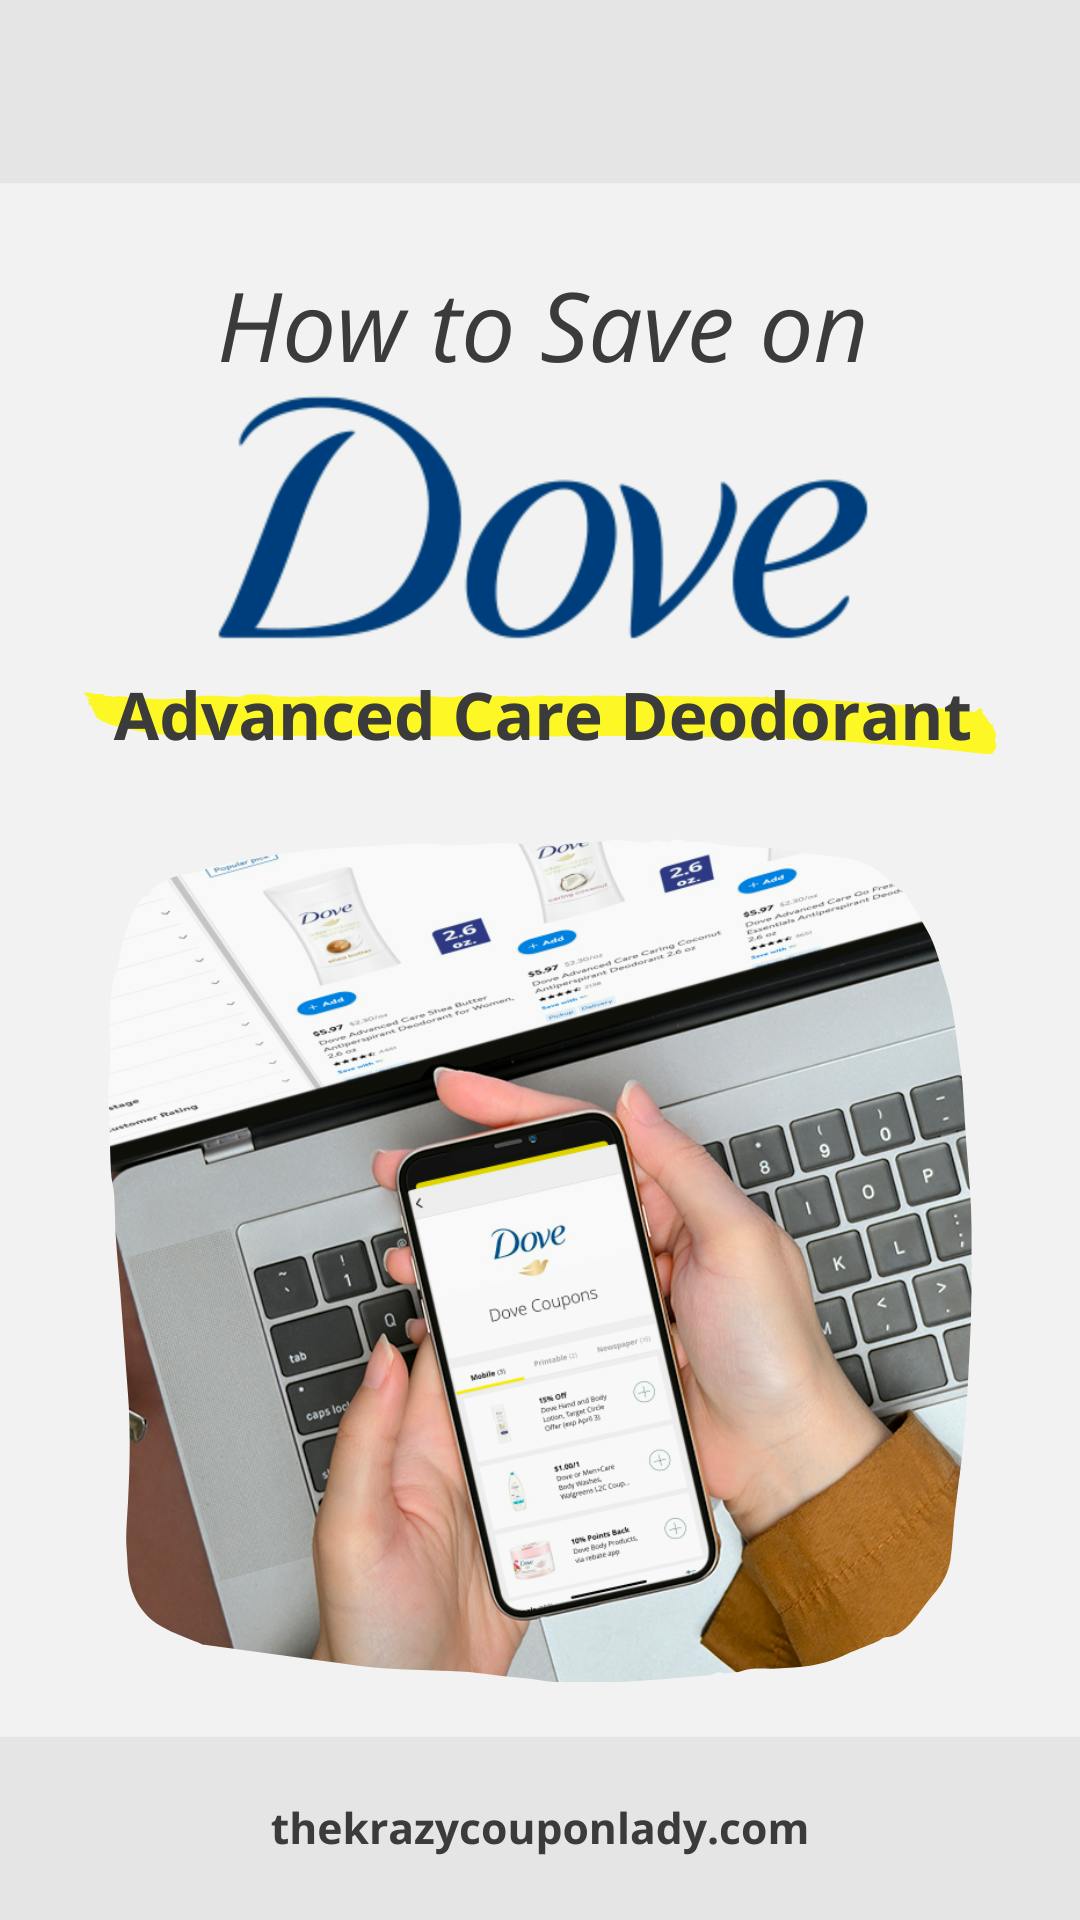 How to Score Dove Advanced Care Deodorant for Less